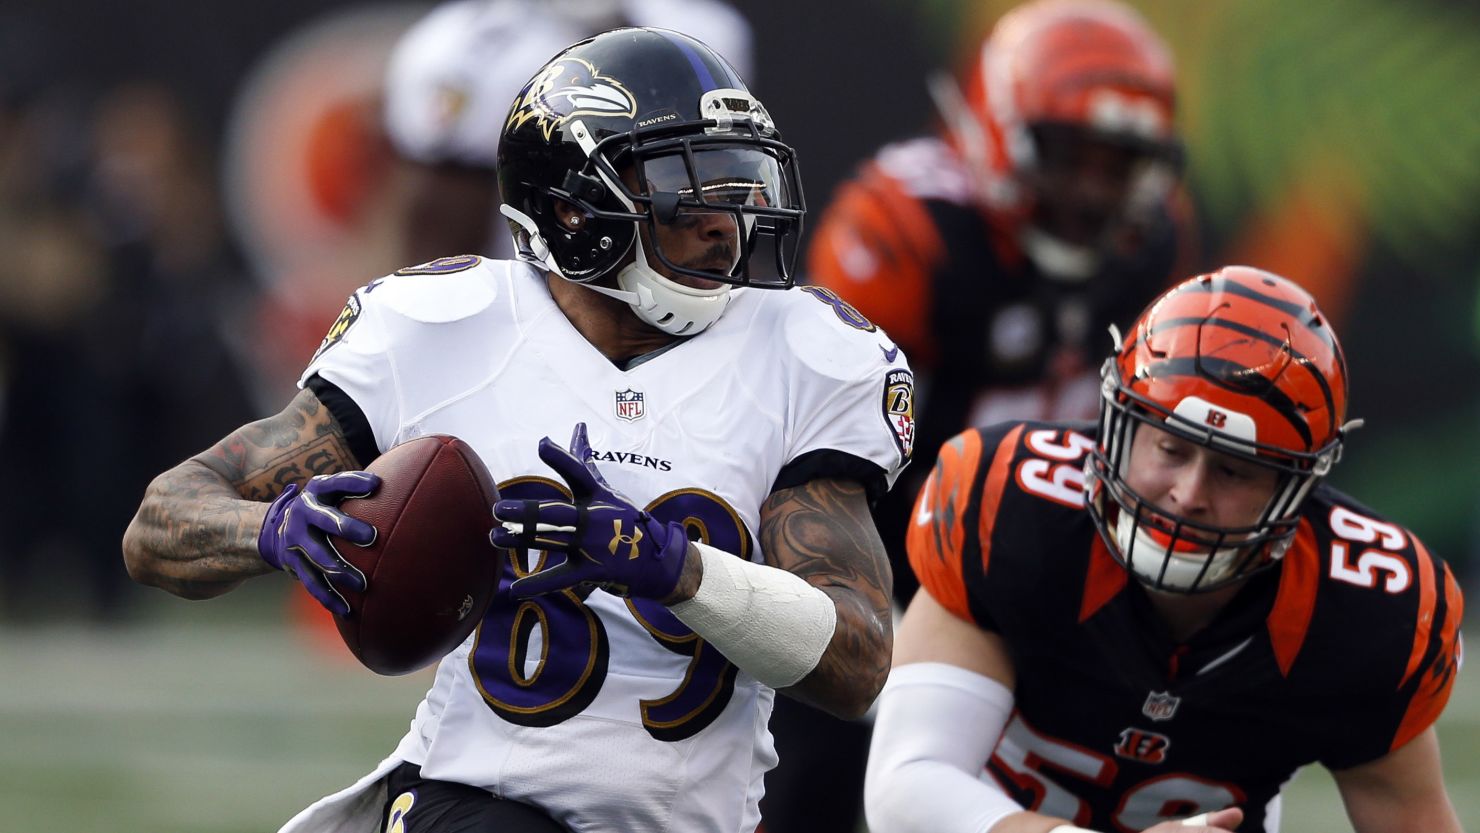 Baltimore Ravens wide receiver Steve Smith played his final NFL game Sunday. The Ravens lost to the Cincinnati Bengals, 27-10.